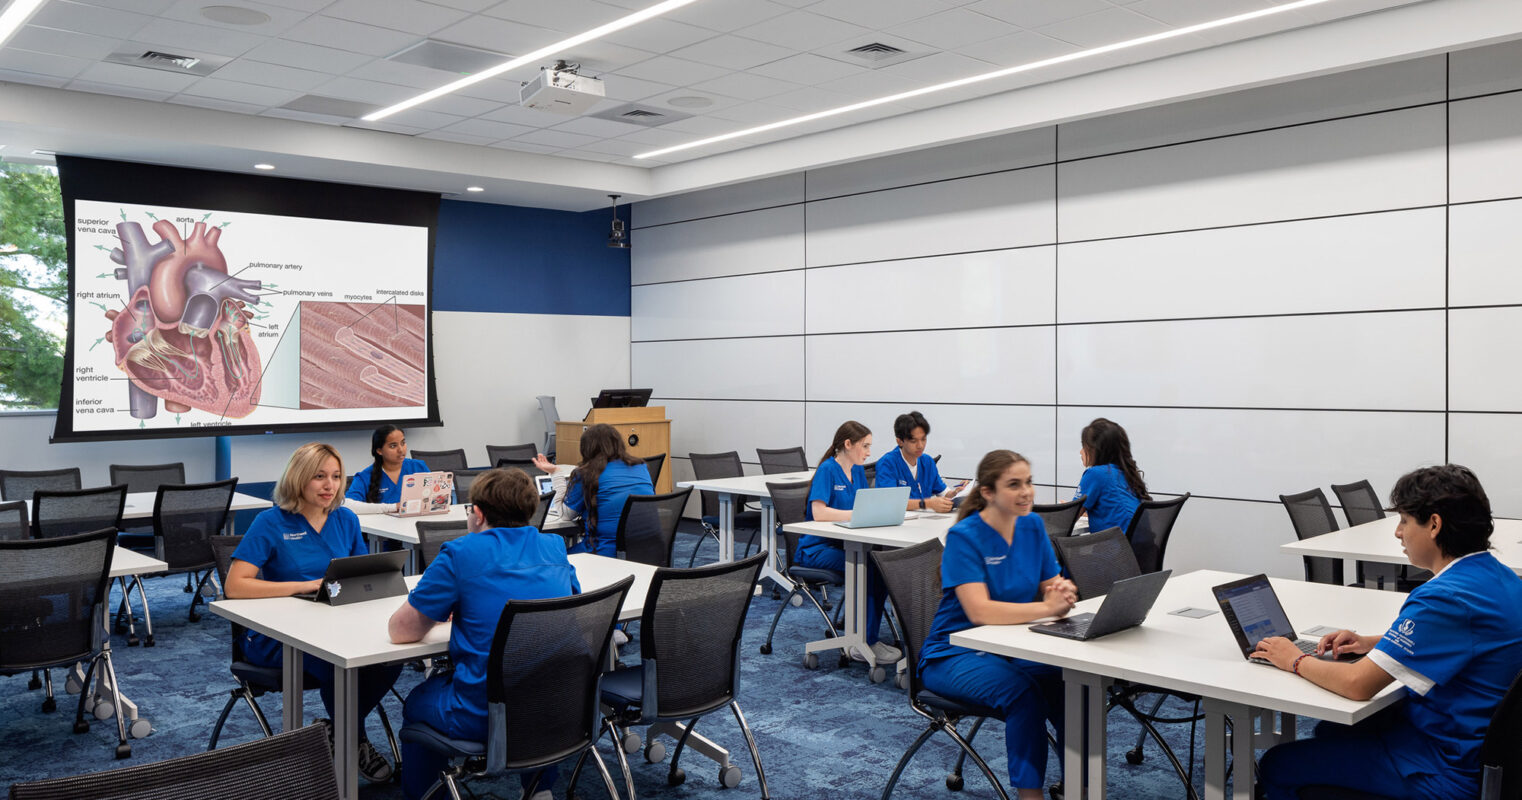 Spacious classroom featuring modern movable tables and chairs with a blue and white color scheme. The front wall displays a large projection screen, while ample natural light enhances the learning environment.